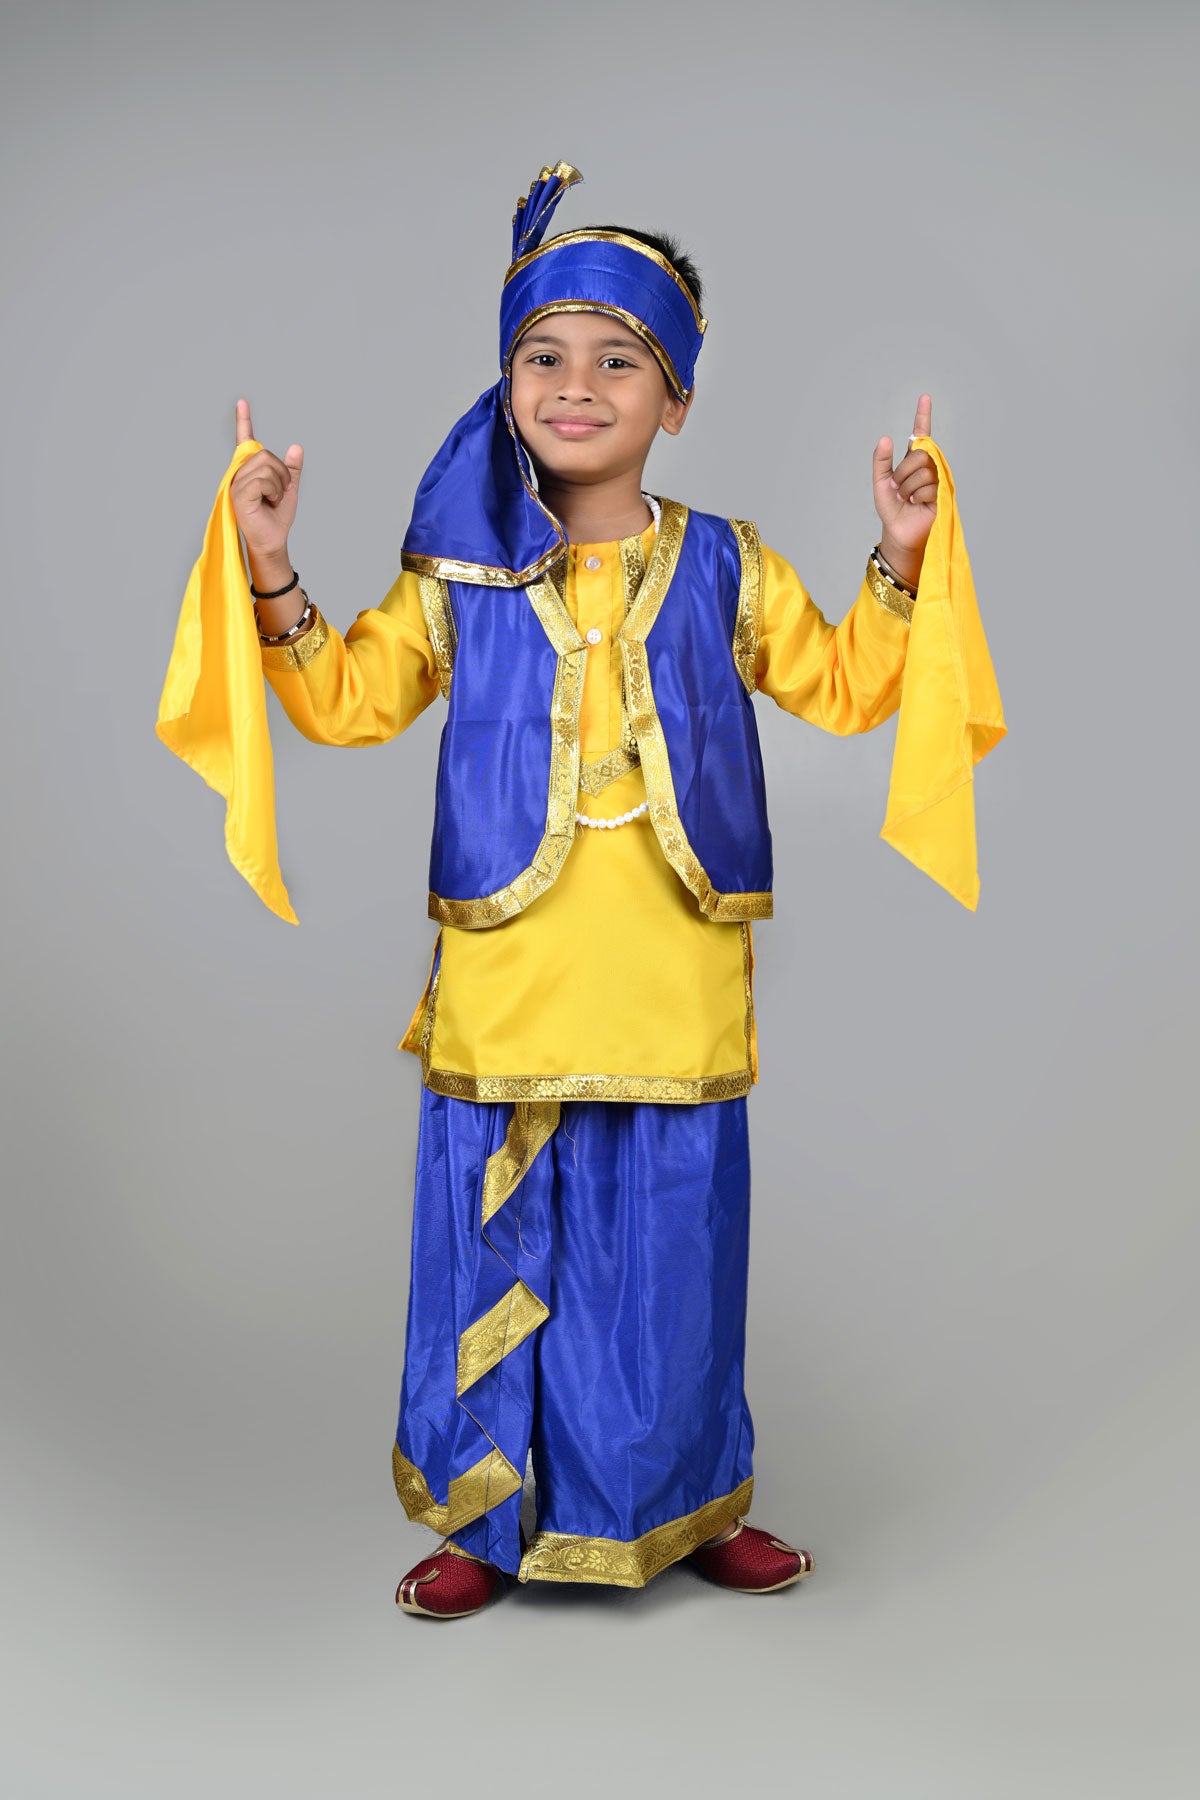 Indian Dance Costumes for Rent  BollywoodIndian Dance Costume Rental